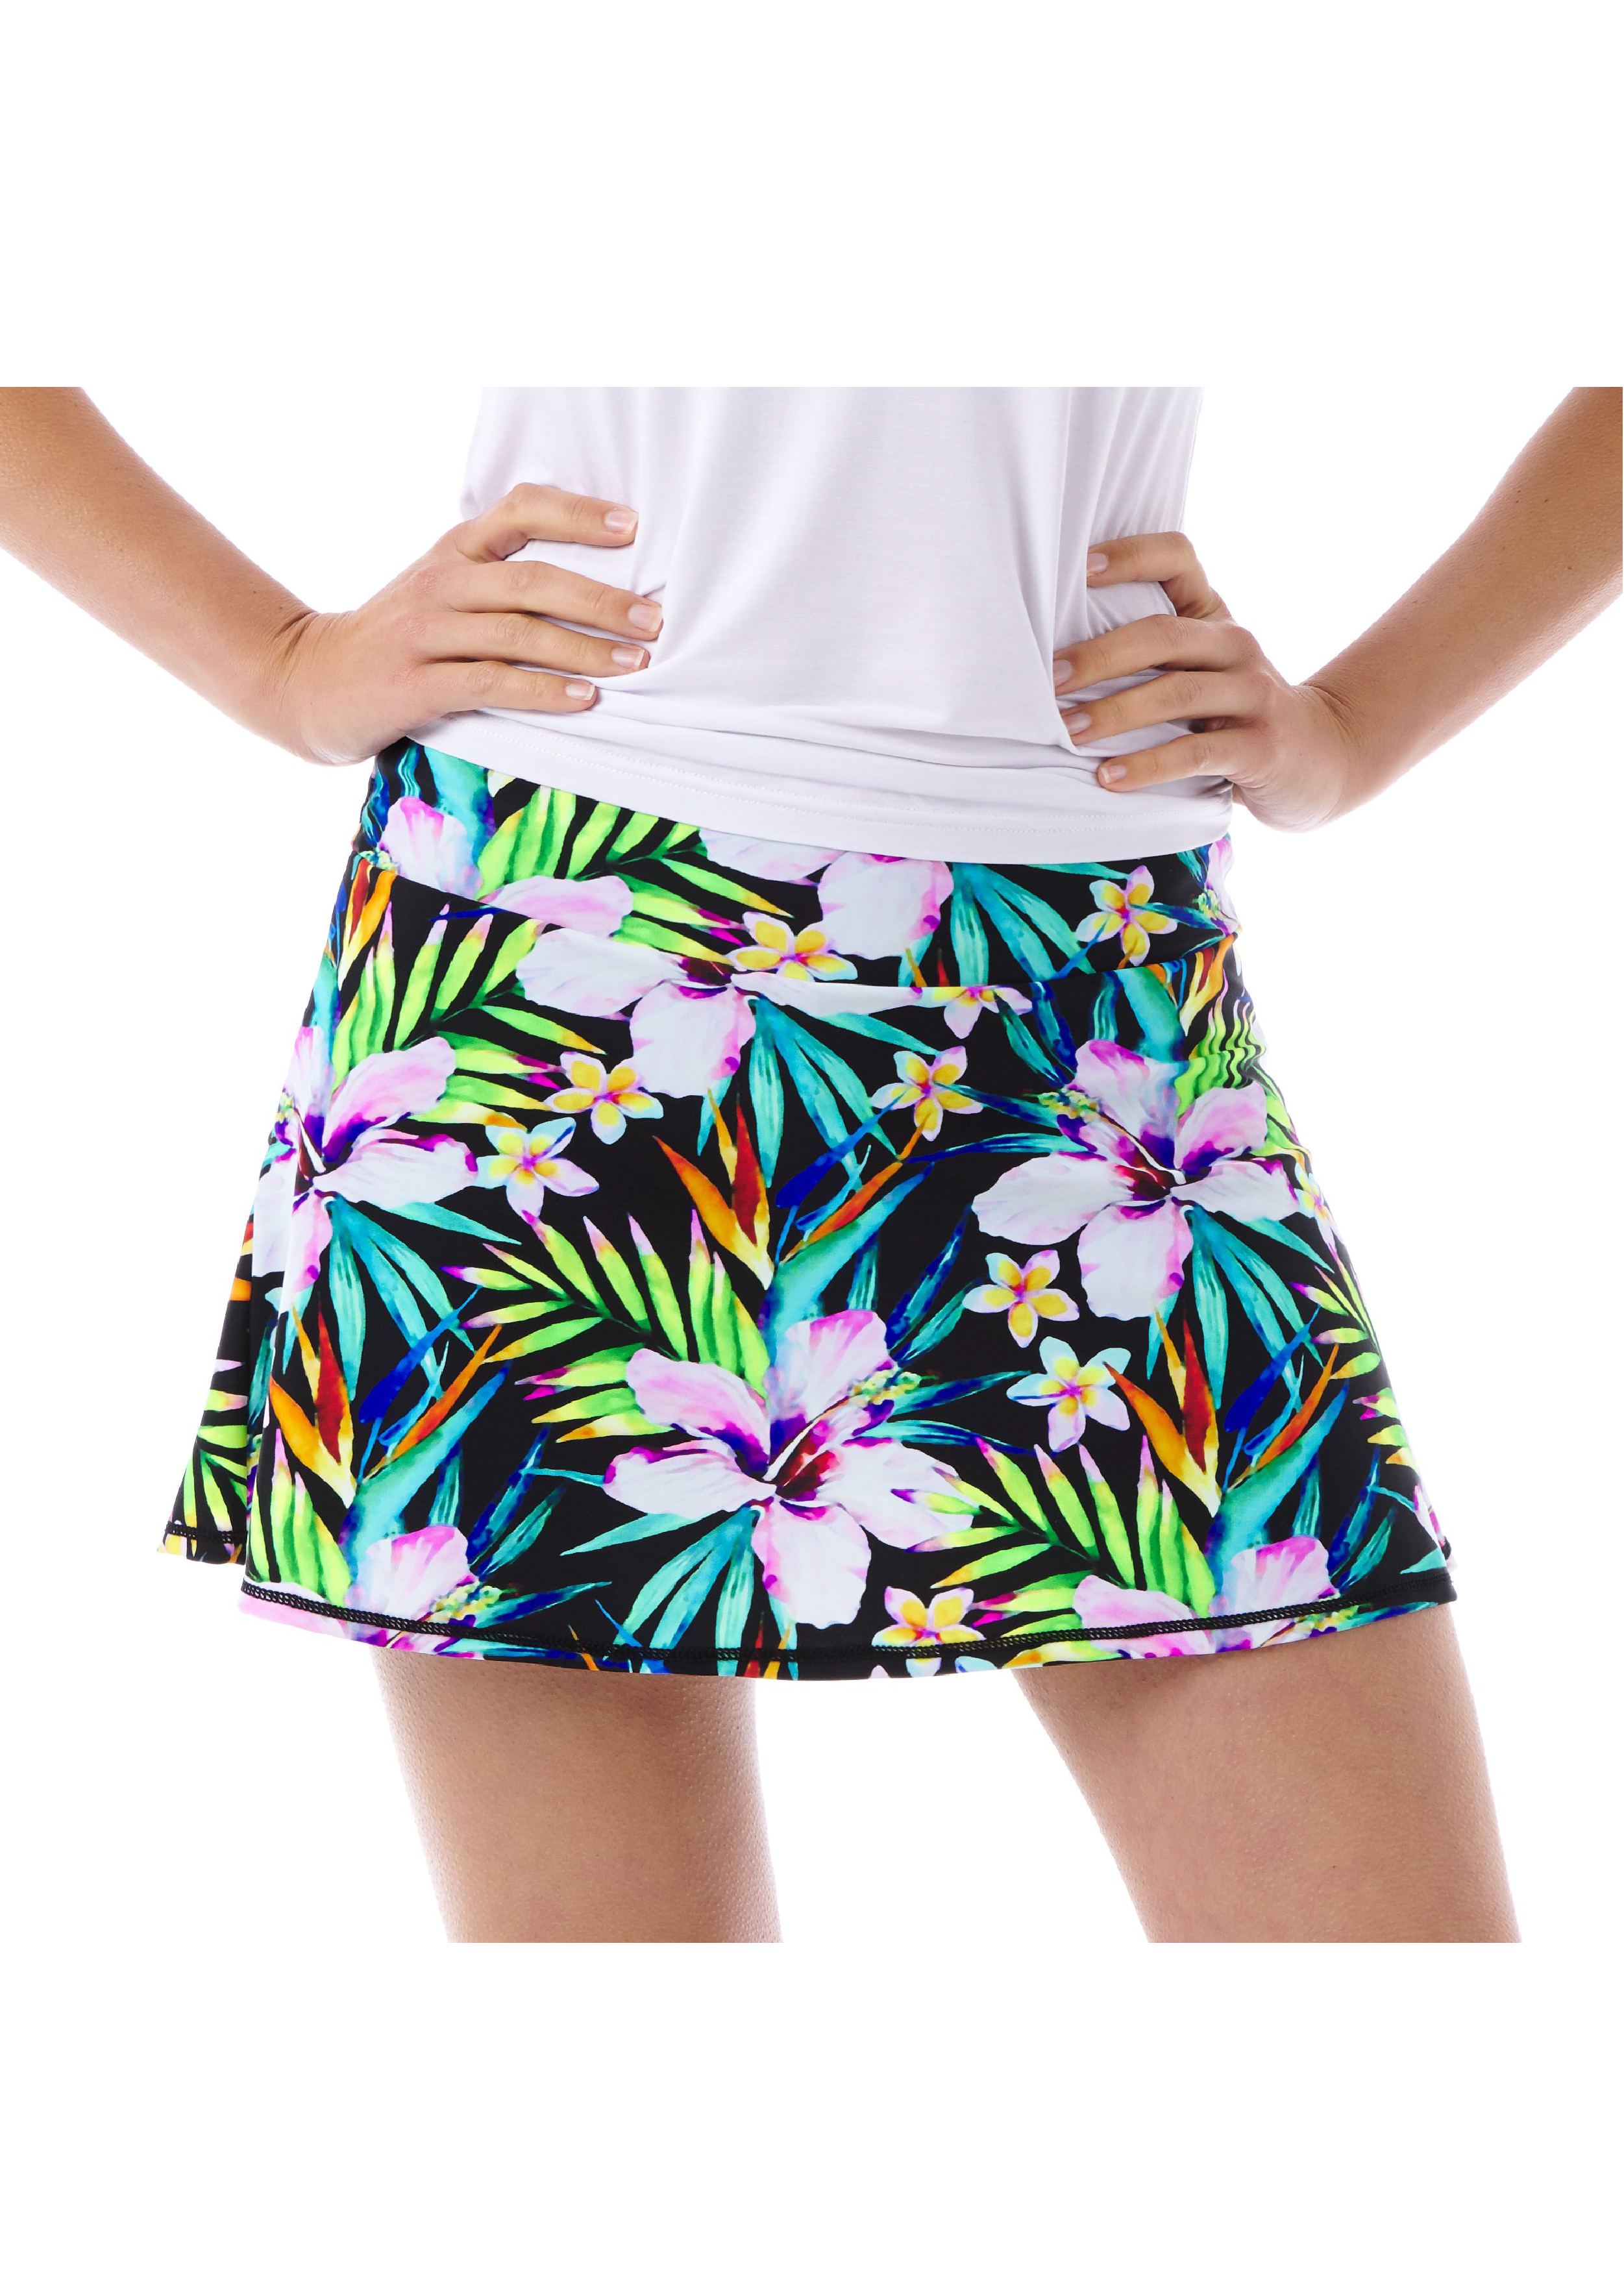 Black and Green Tropical Tennis Skirt with Black Shorts